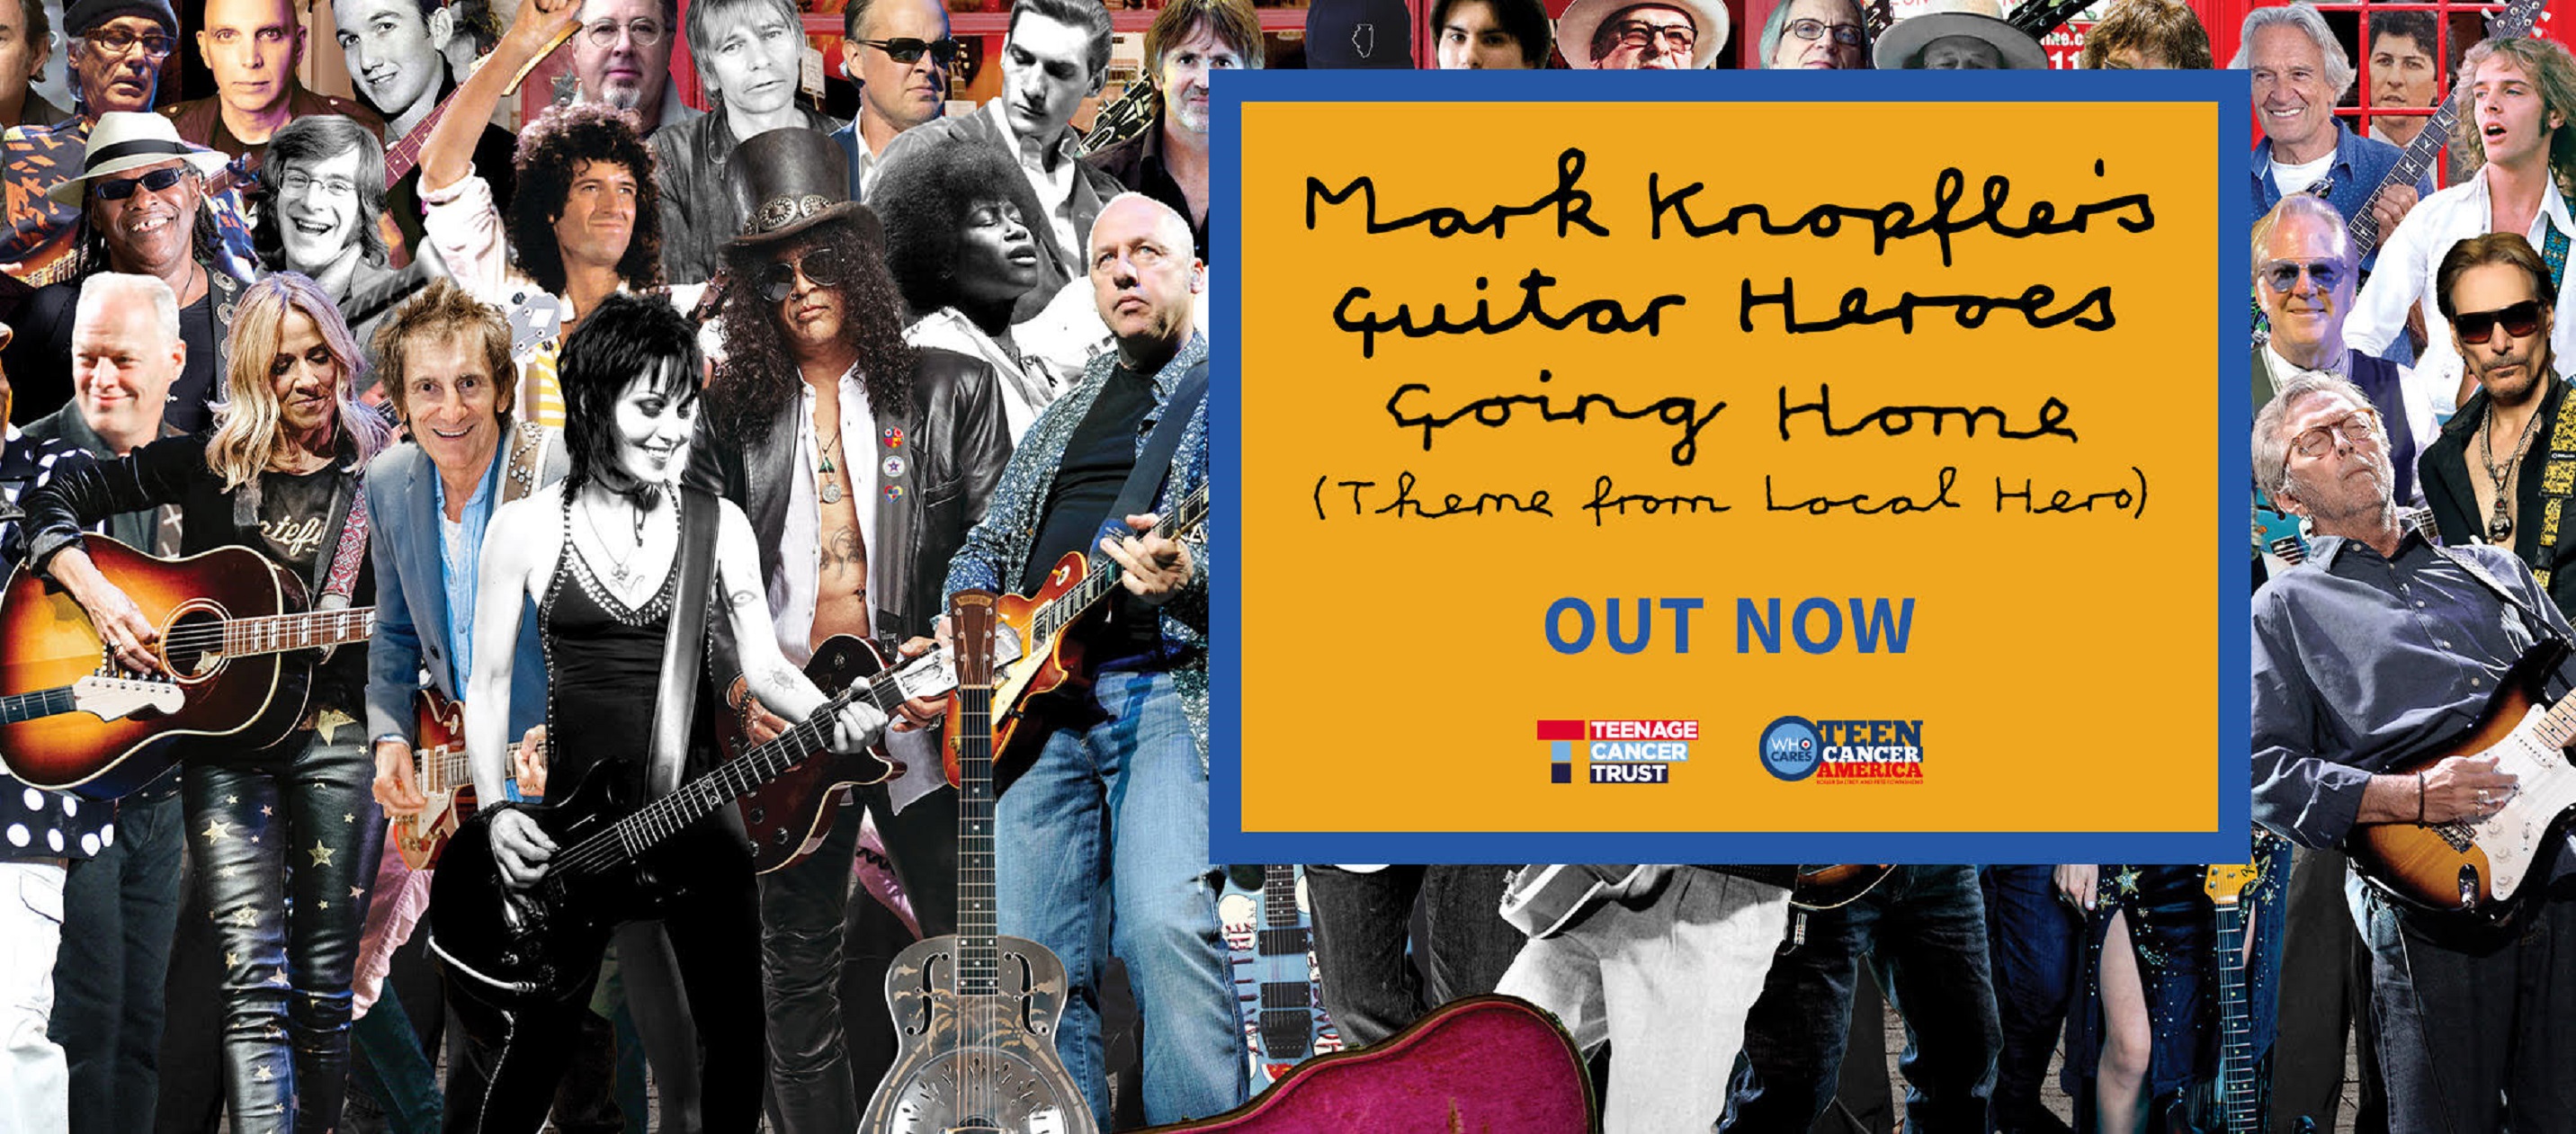 Mark Knopfler's Star-Studded Charity Single 'Going Home' Premieres: An Epic Collaboration for Teen Cancer America